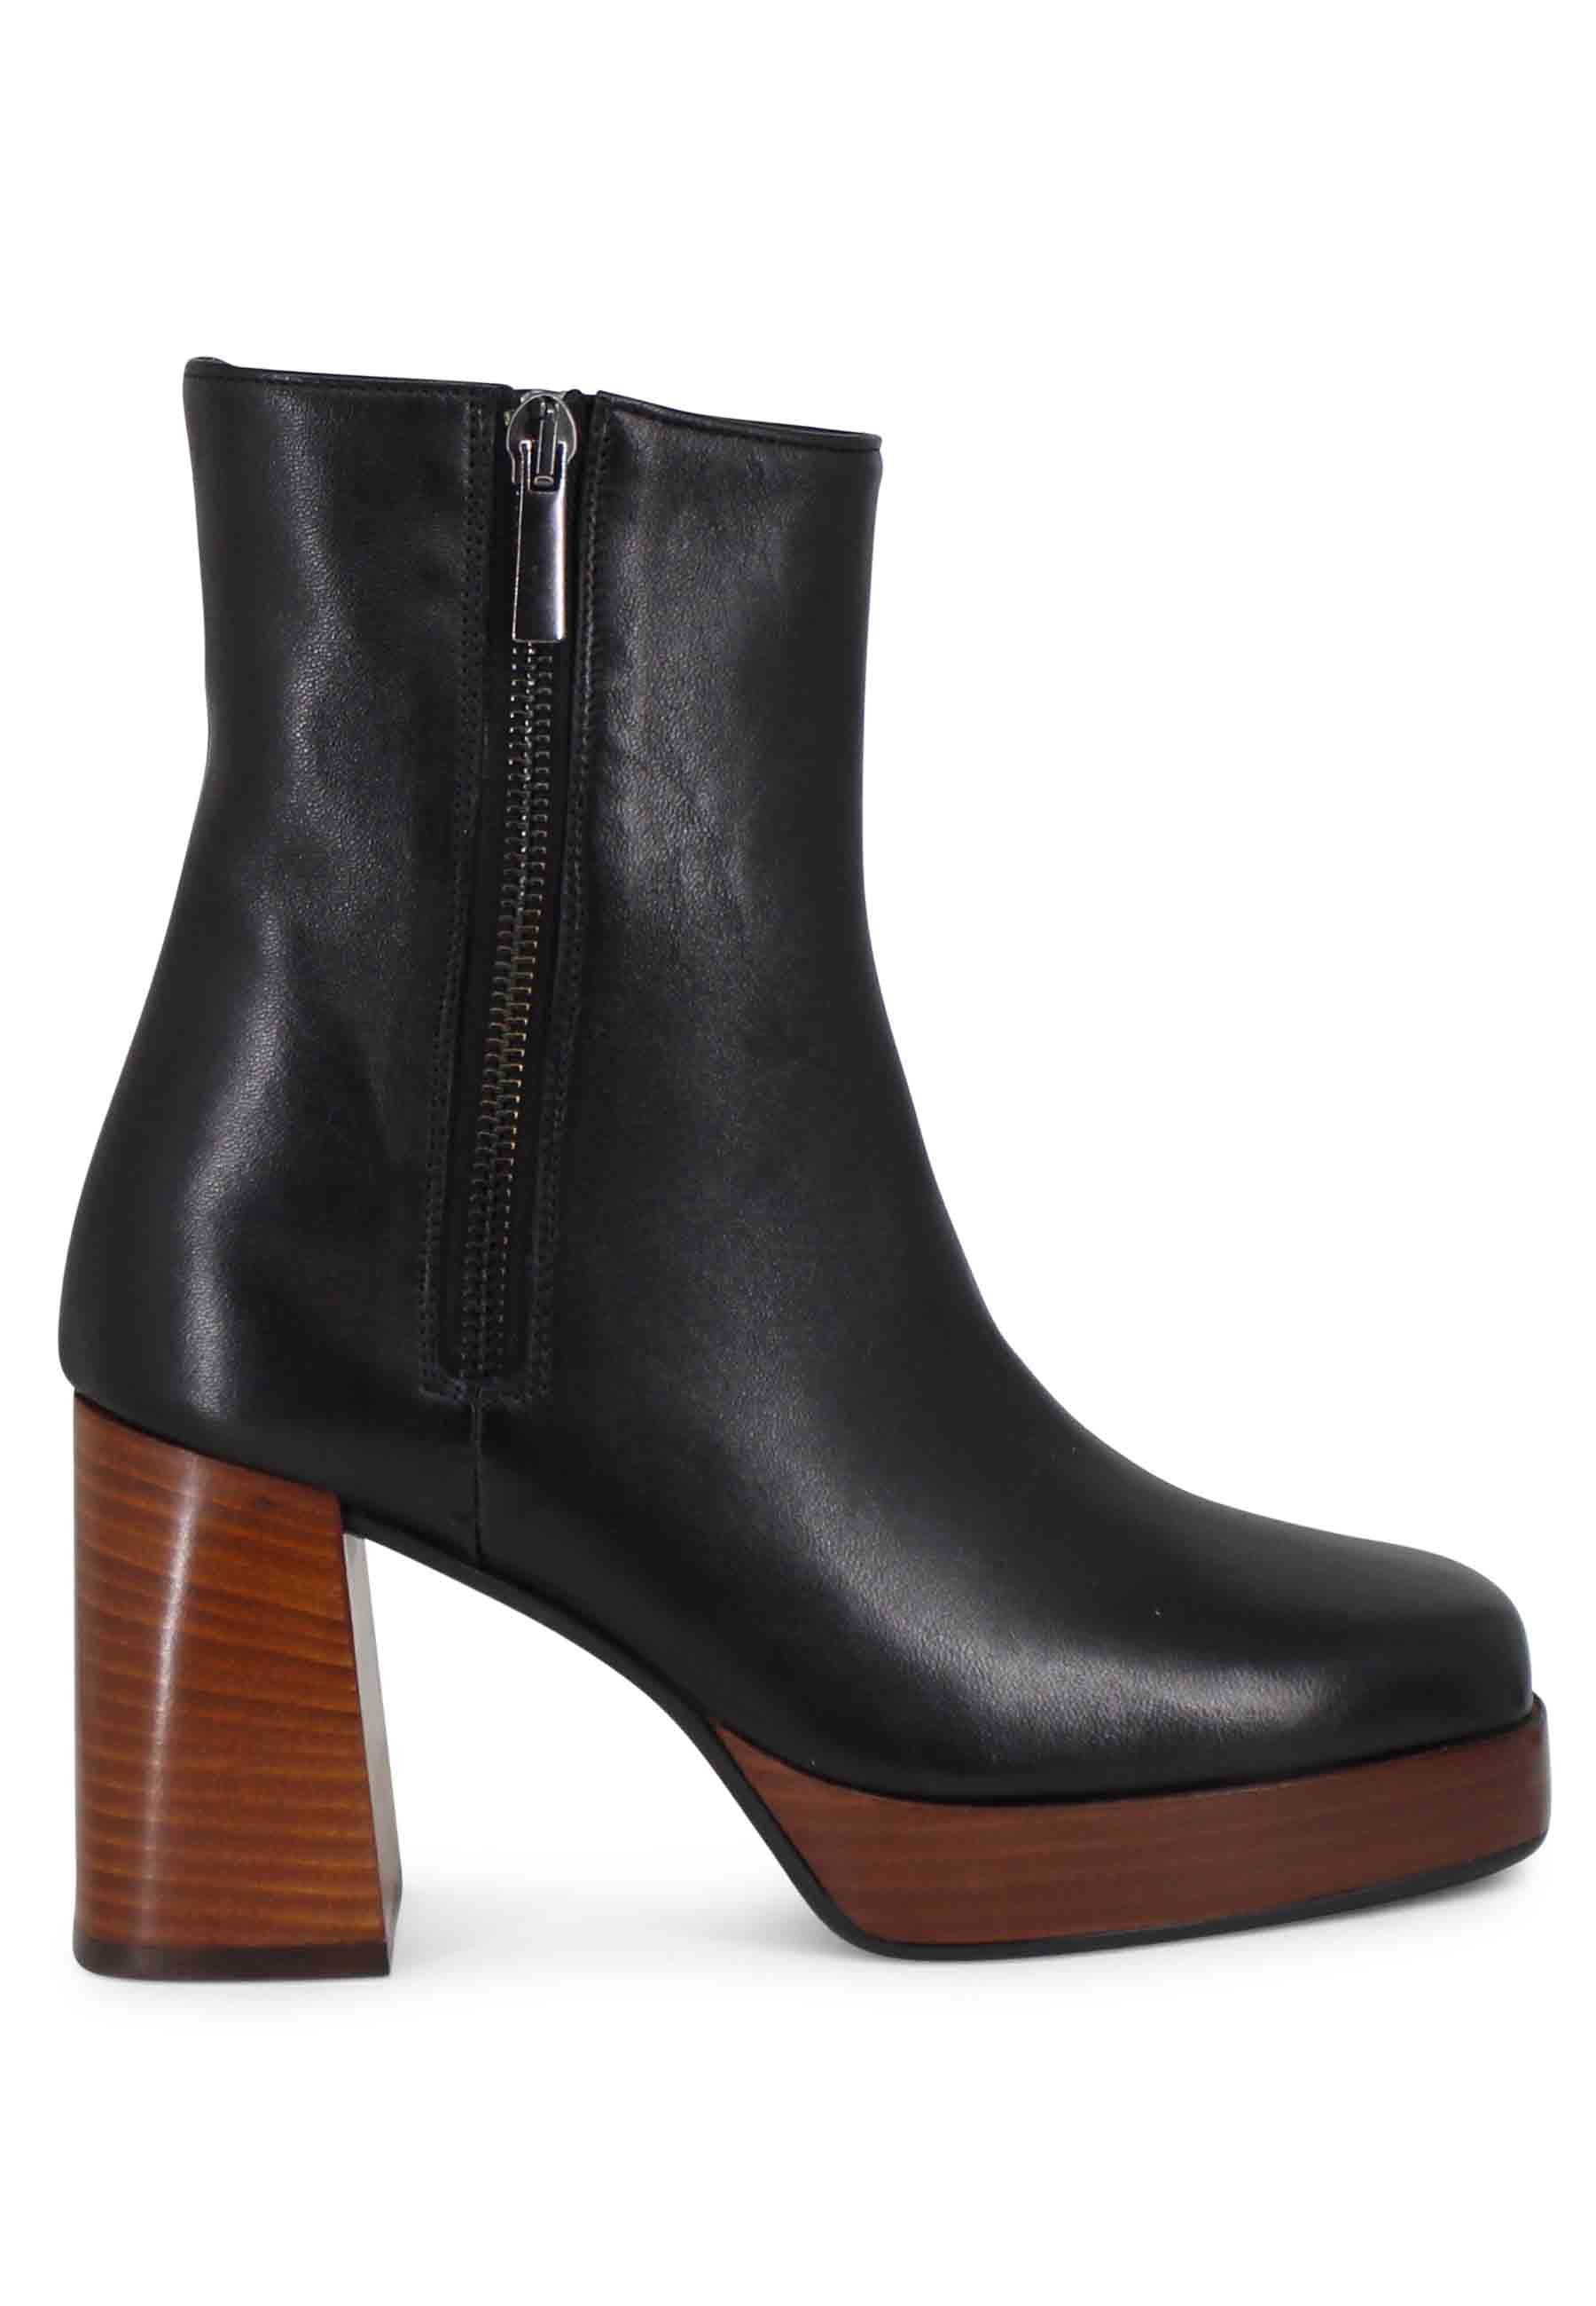 Women's black leather ankle boots with high heel and platform with external zip